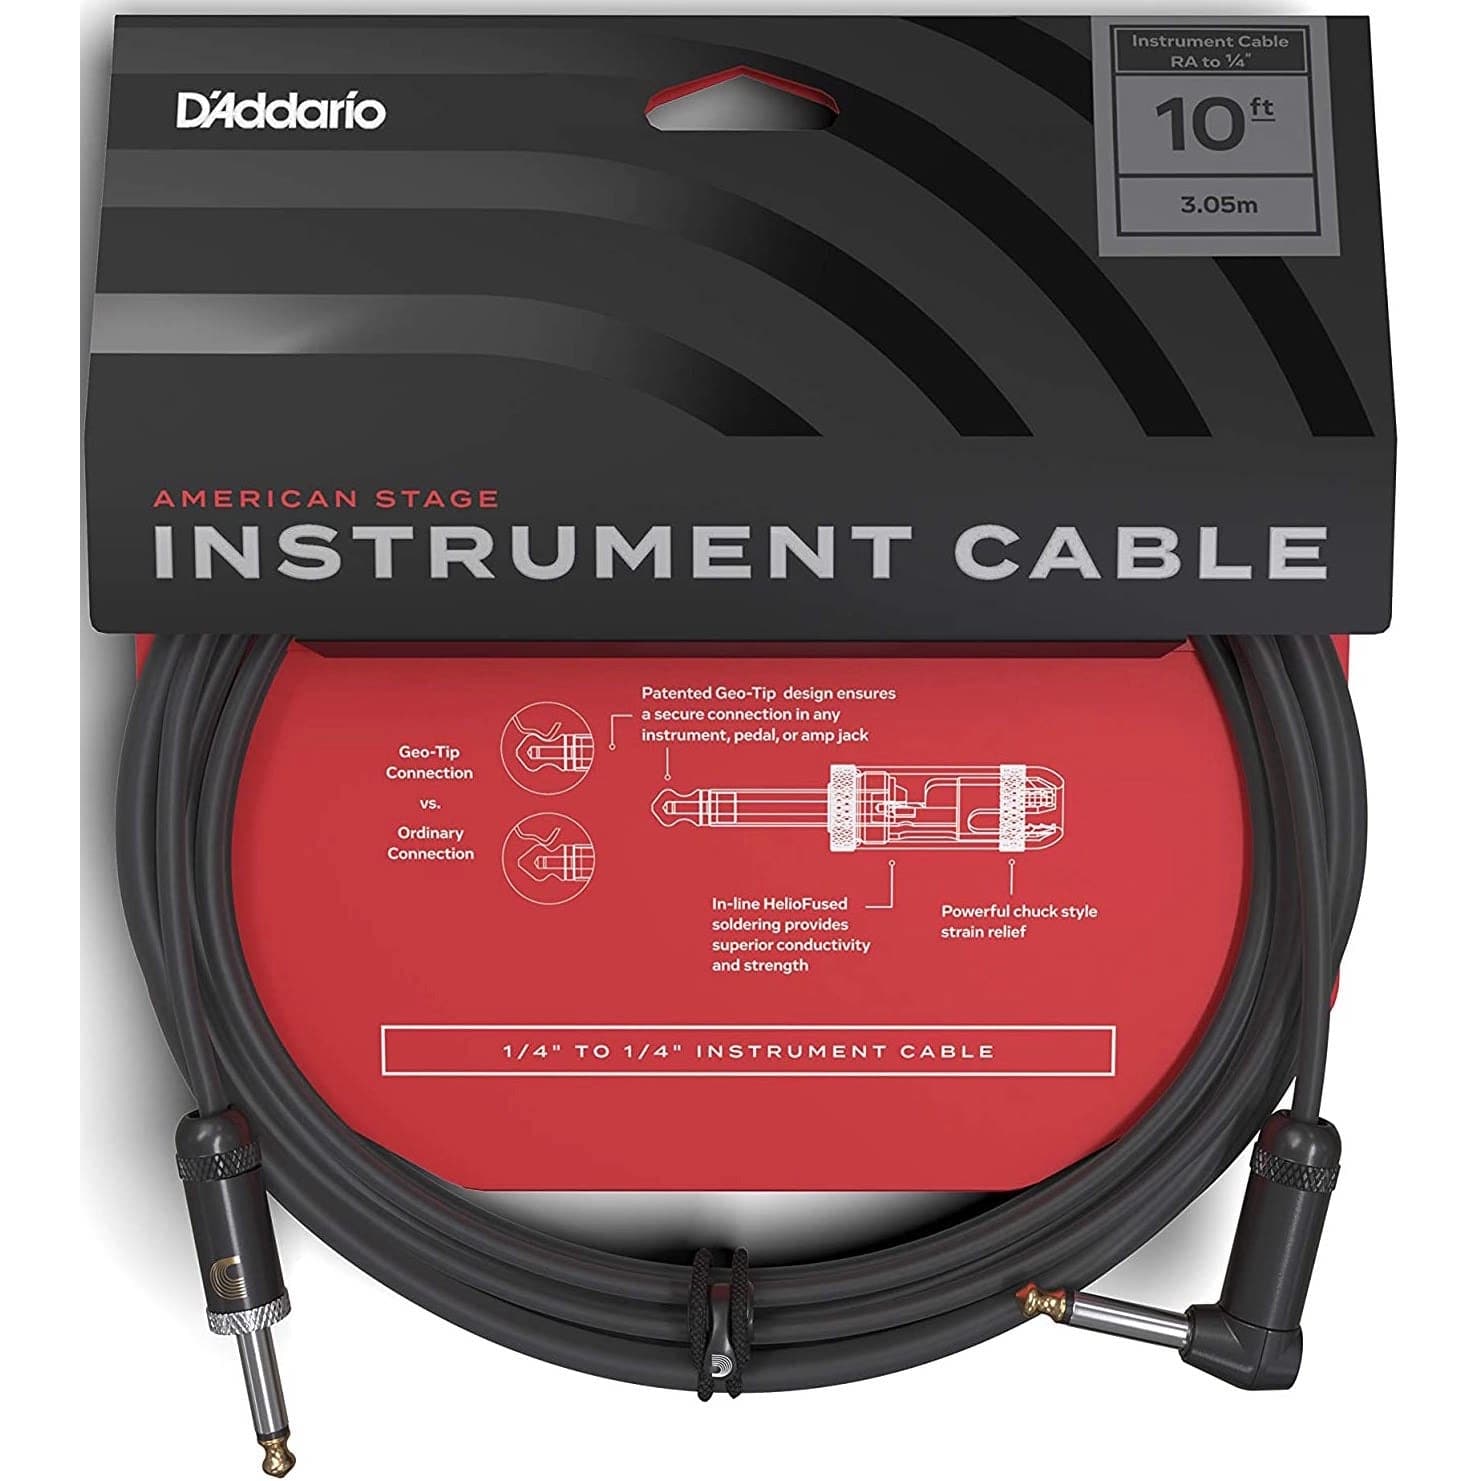 D'Addario American Stage Instrument Cable - 10ft (3meters) - Right Angle